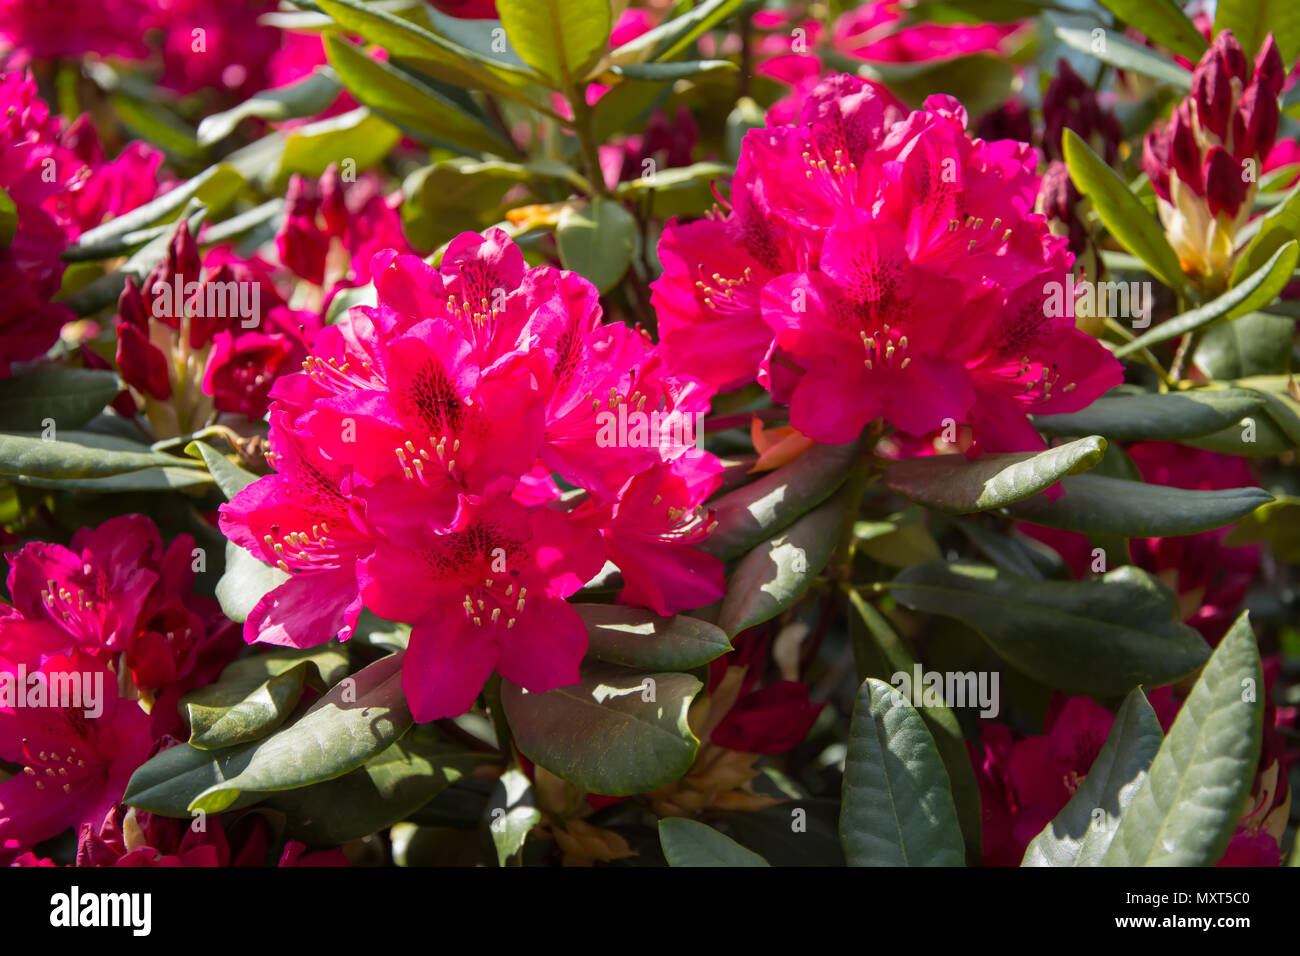 Closeup of two red rhododendron flowers Stock Photo